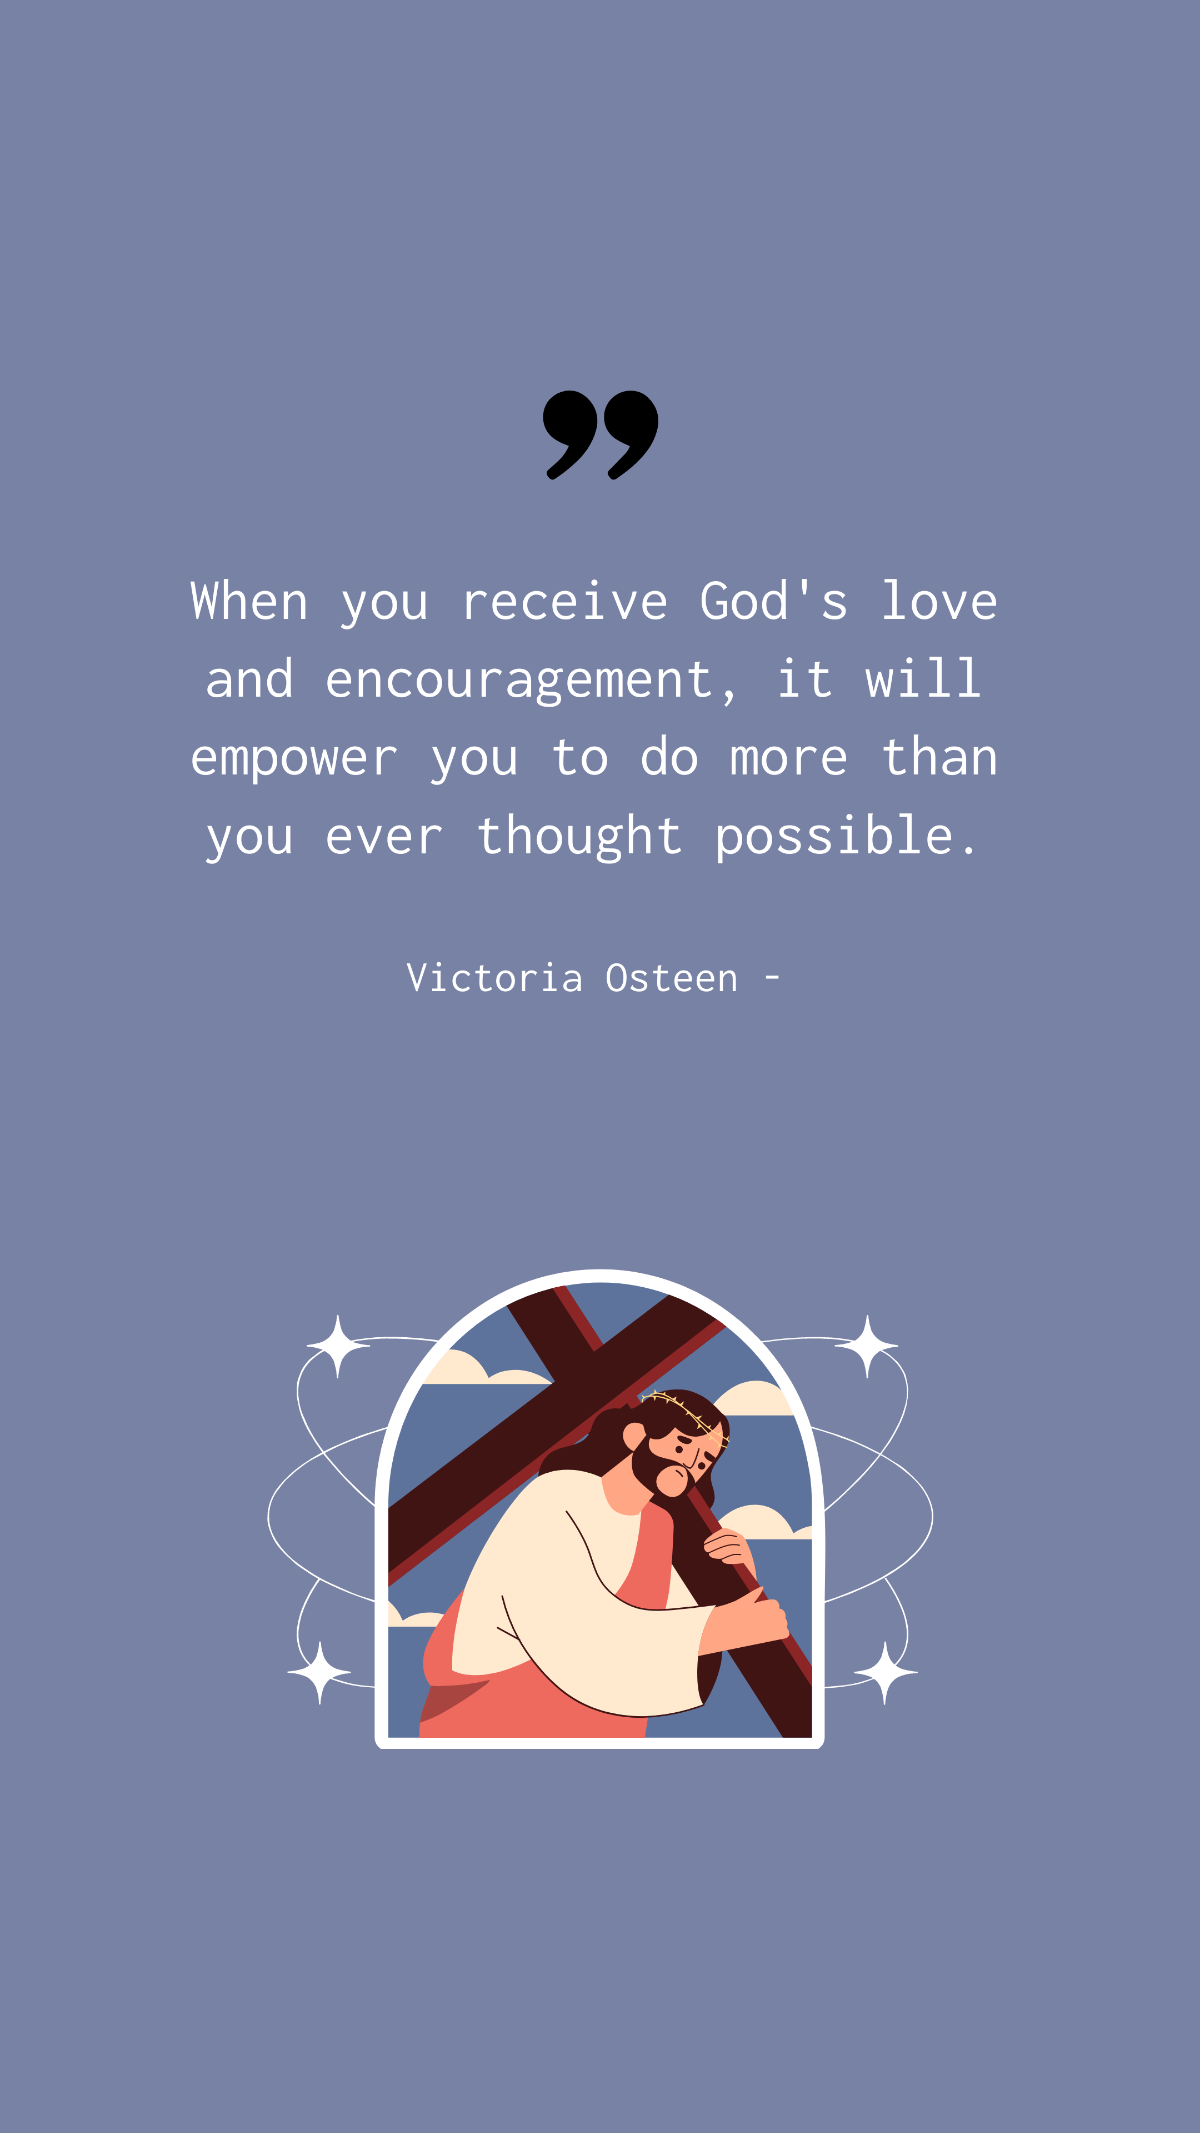 Victoria Osteen - When you receive God's love and encouragement, it will empower you to do more than you ever thought possible.